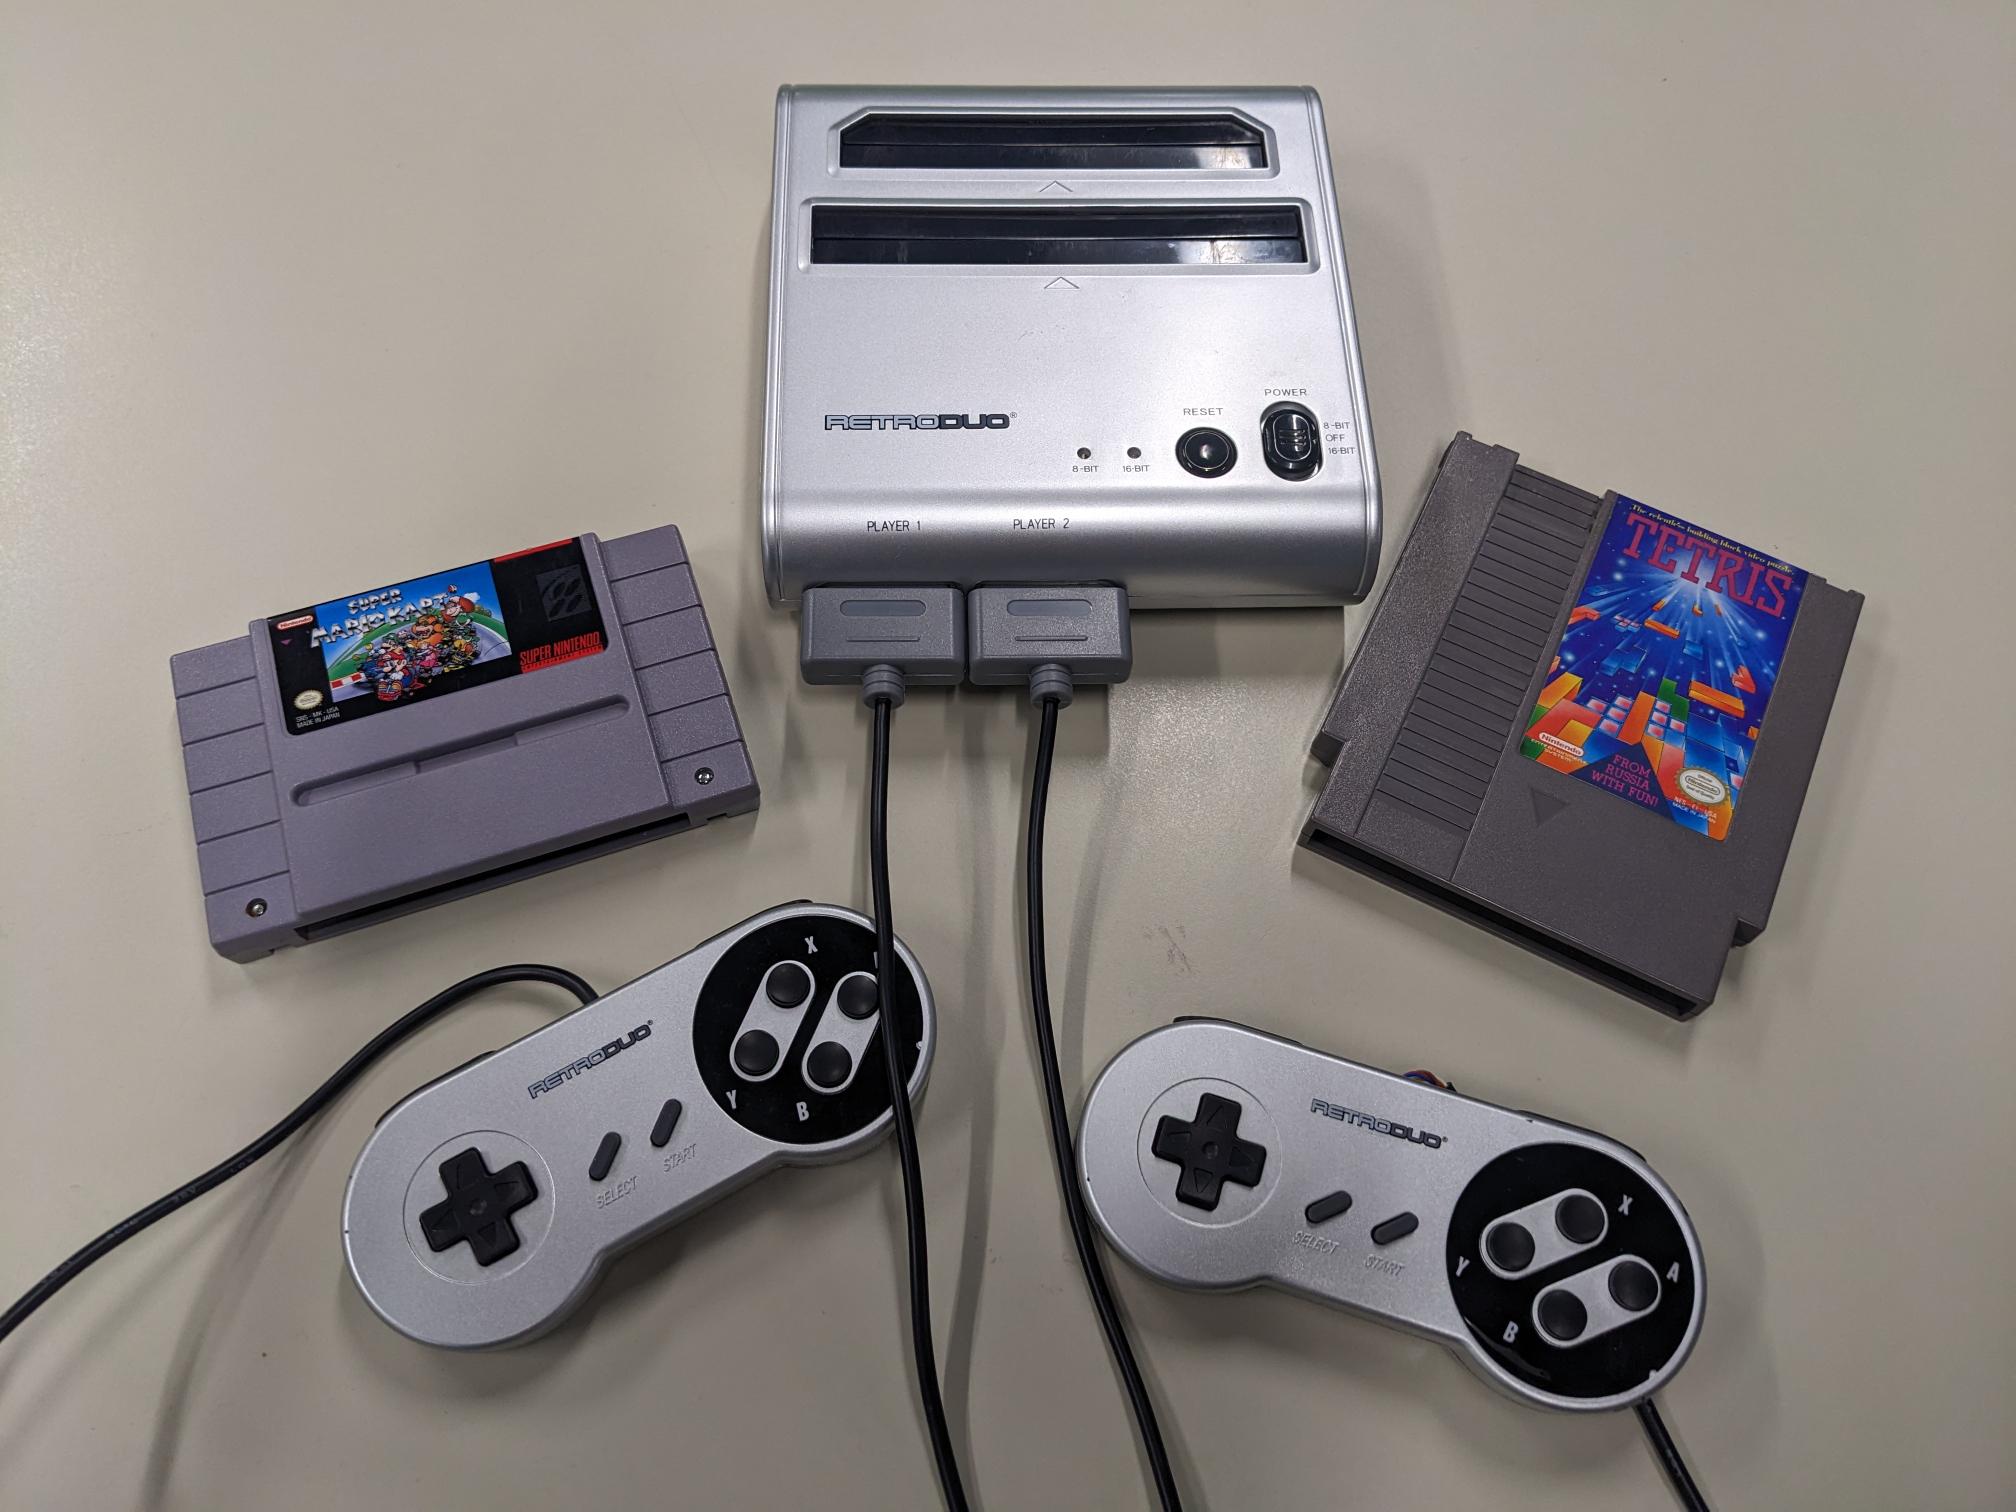 NES and SNES game system with two controllers and an NES cartridge and SNES cartridge